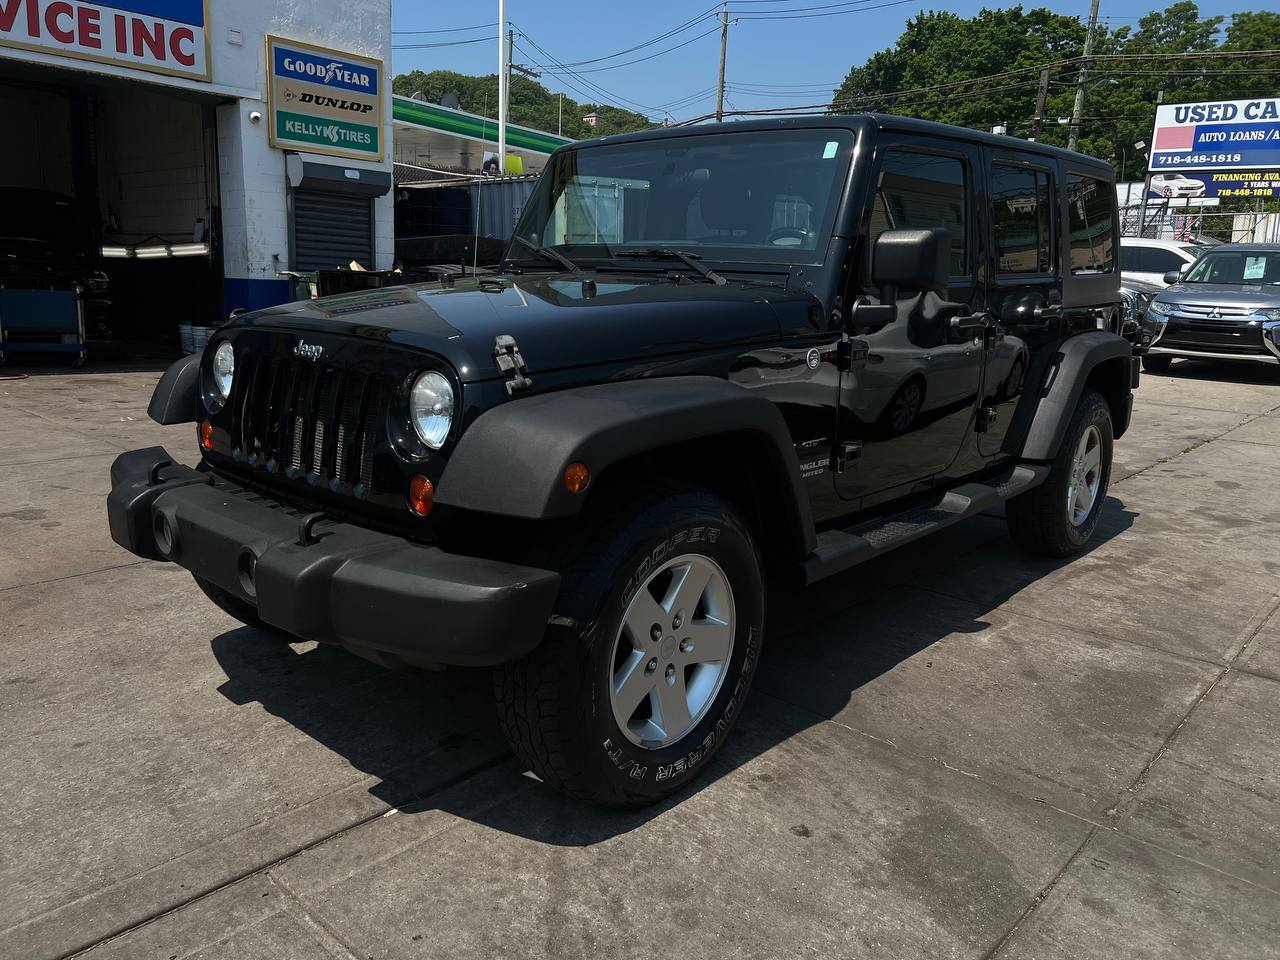 Used Car - 2011 Jeep Wrangler Unlimited Sport 4x4 for Sale in Staten Island, NY